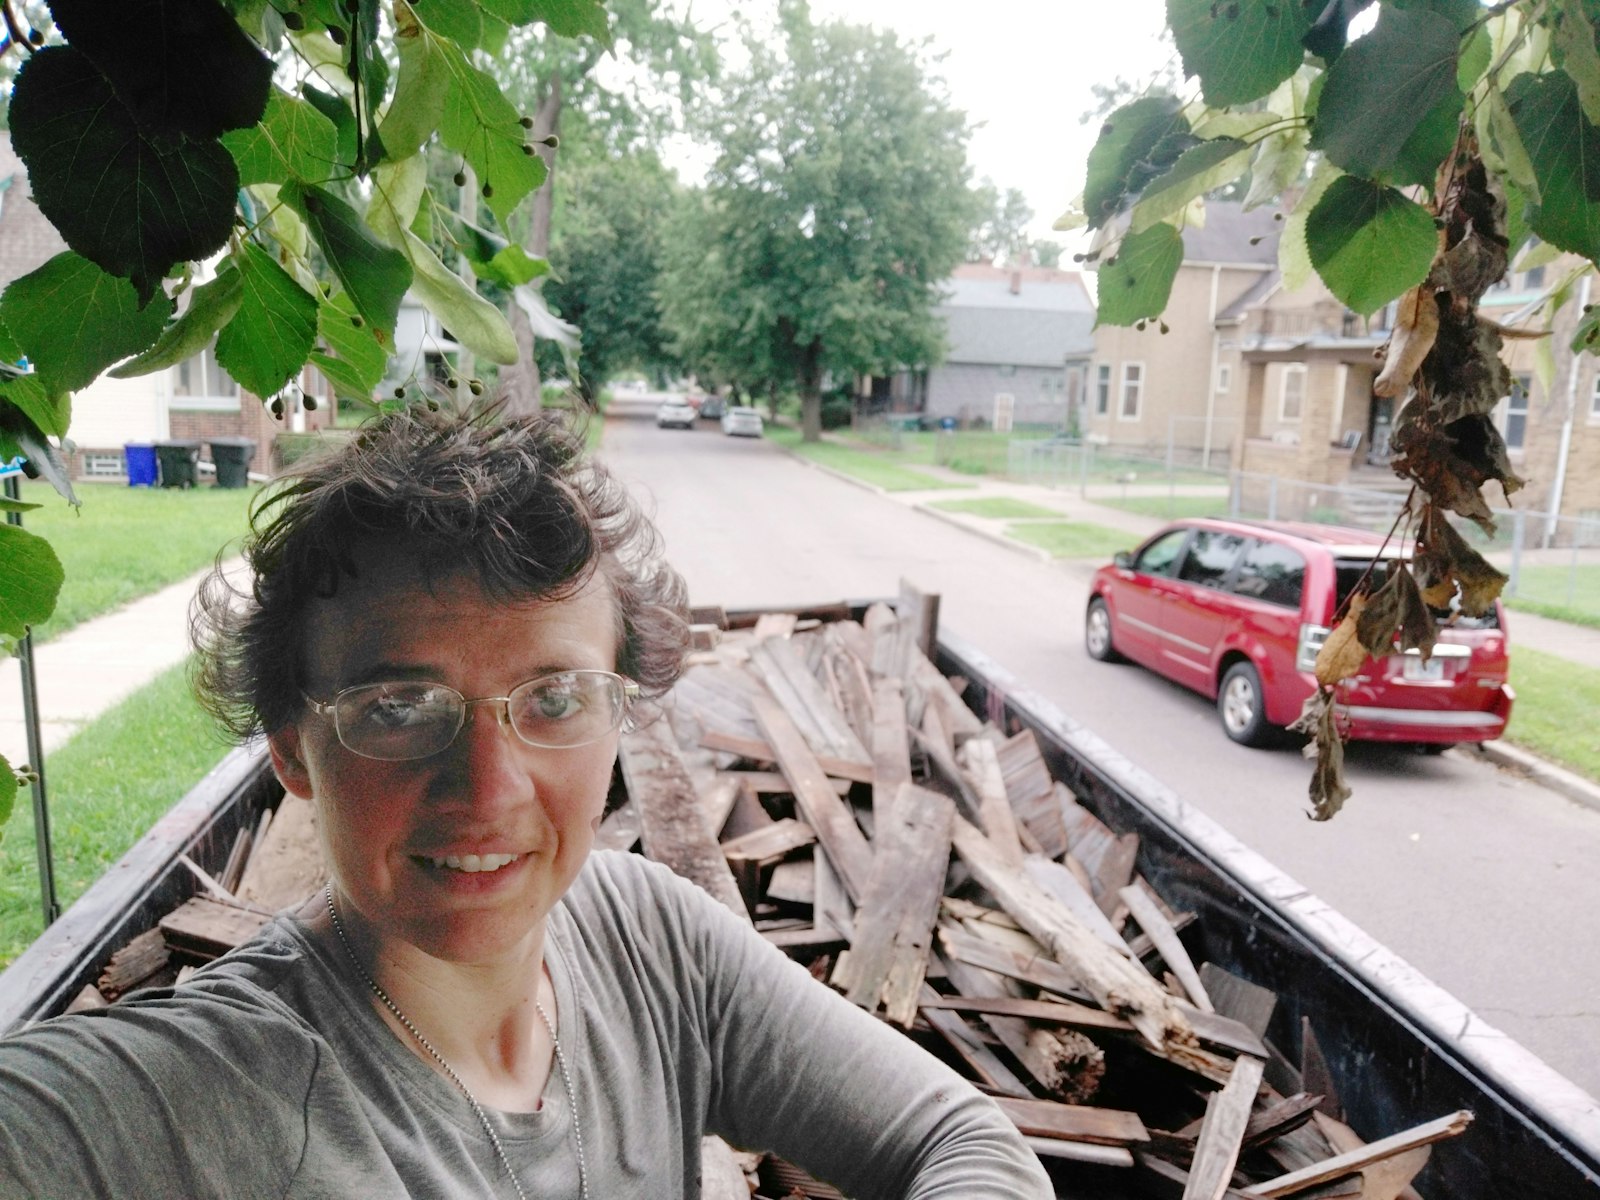 Genevieve Kocourek stands in front of a trailer after her organization, Firm Foundations of Hope, helped tear down a garage for an east-side resident. (Courtesy of Genevieve Kocourek)